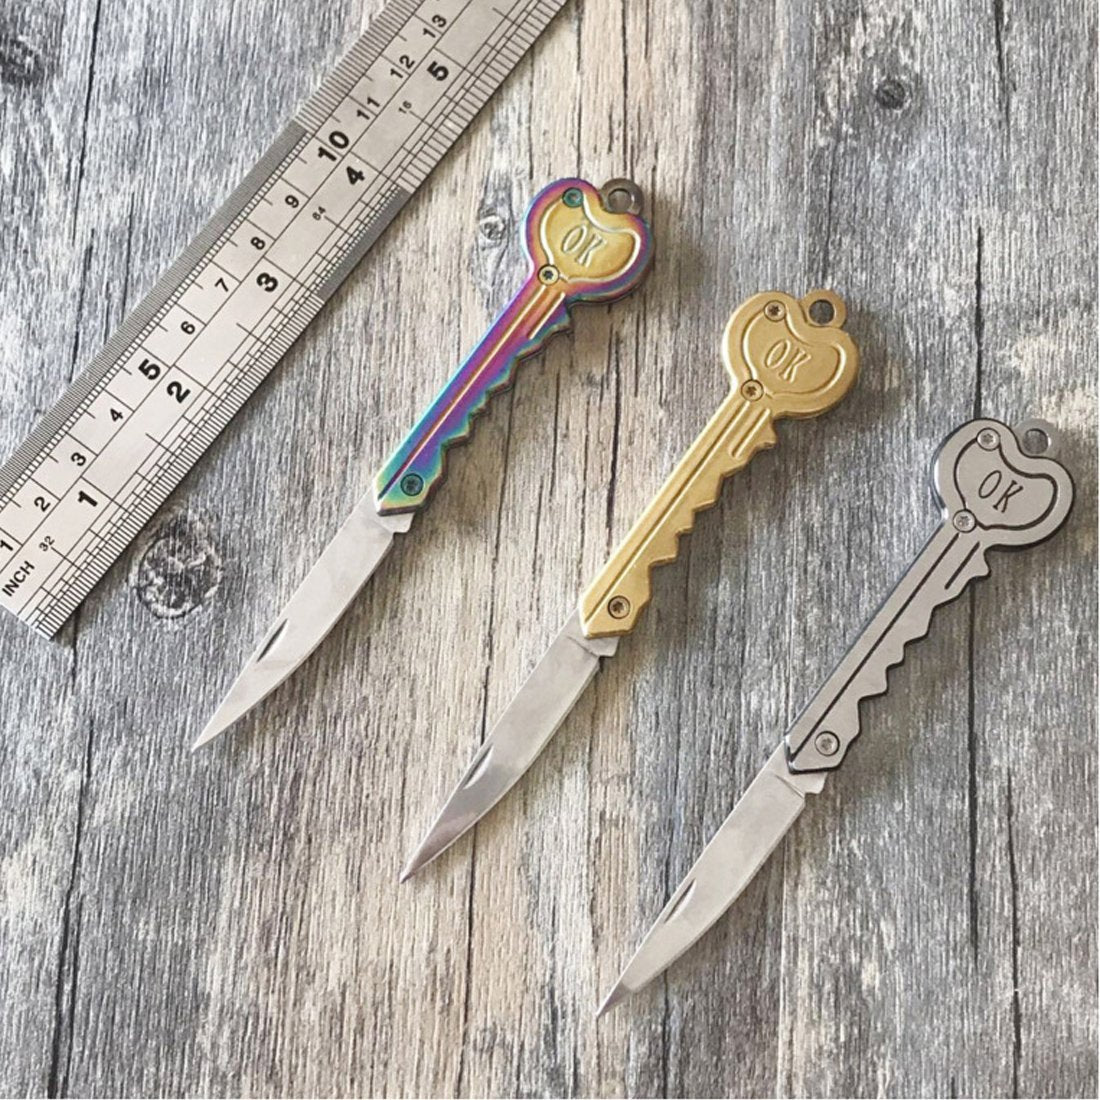 Mini Key Knife Letter Camp Outdoor Keyring Ring Keychain Fold Open